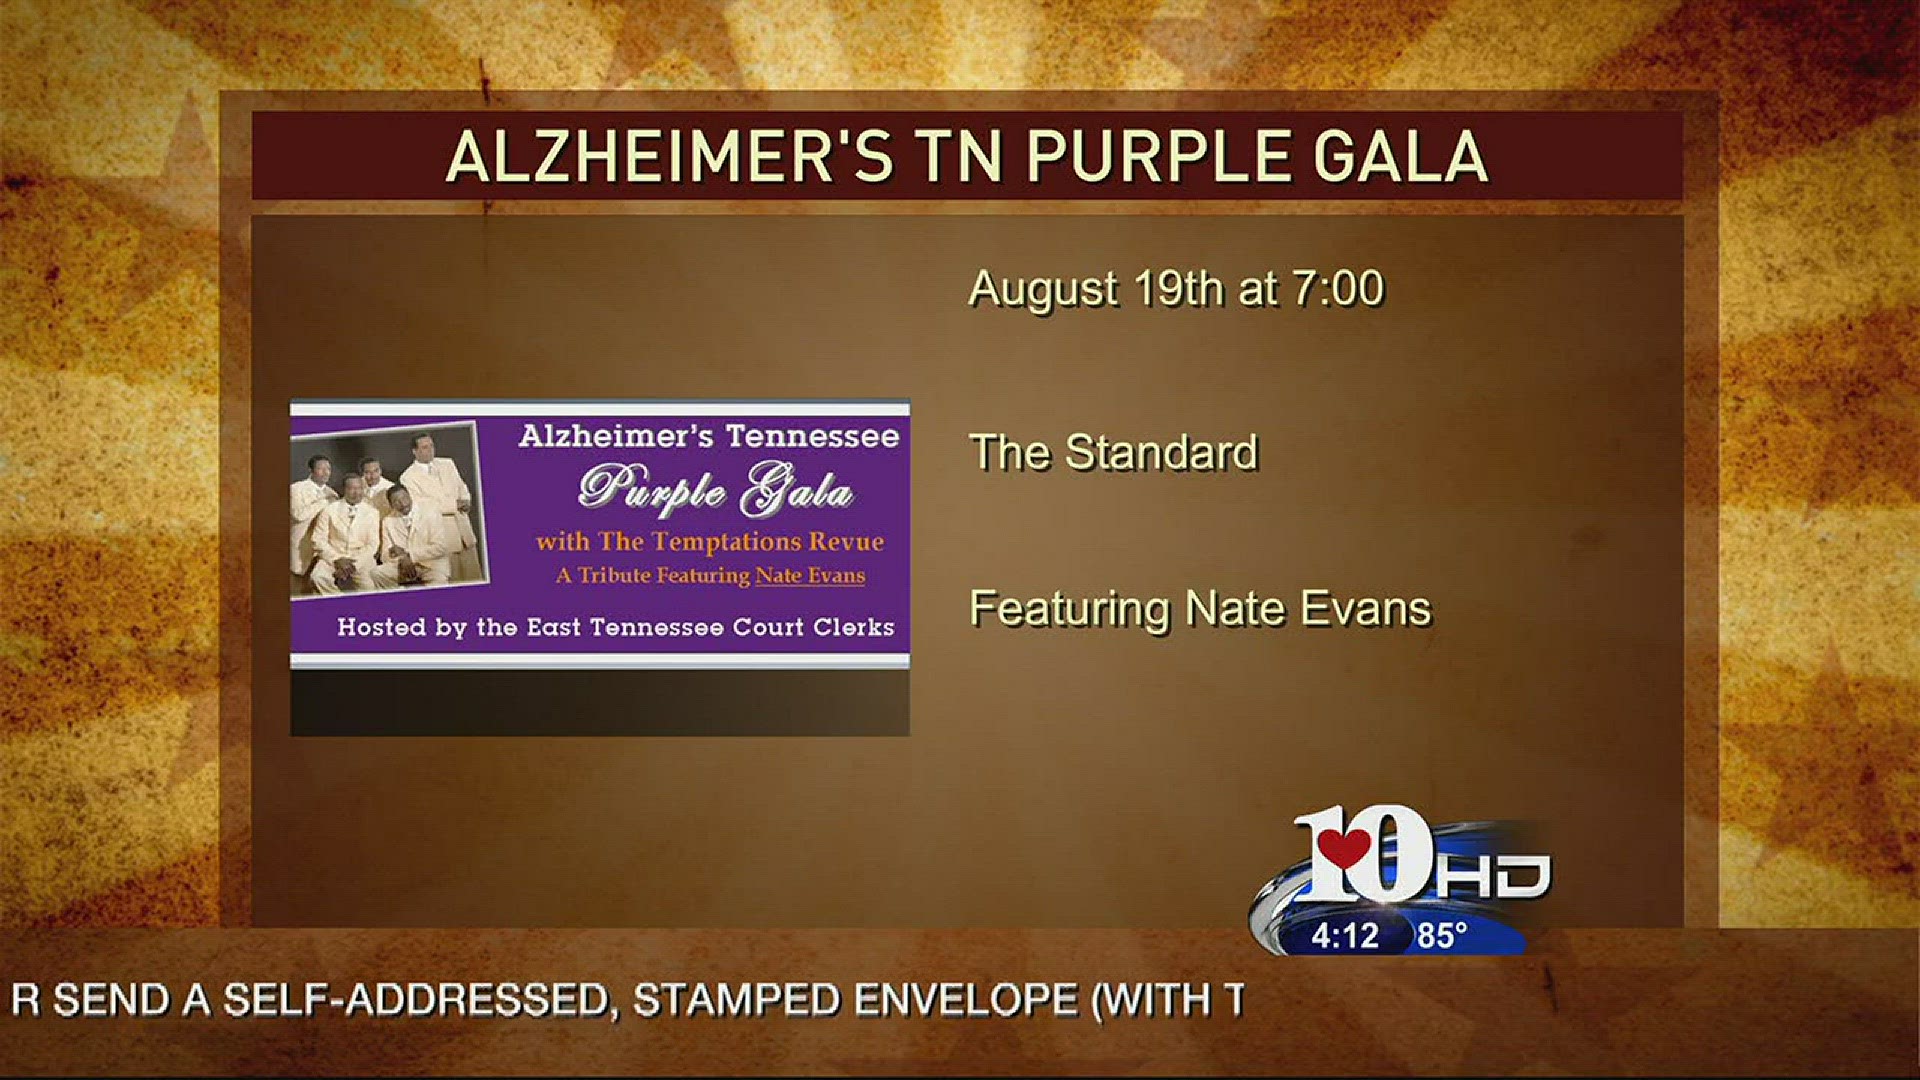 Nate Evans of the Temptations Revue and Knox County Court Clerk Mike Hammond talk about the first Purple Gala to benefit Alzheimer's Tennessee. The event will be August 19 at 7:00 p.m. July 7, 2016.